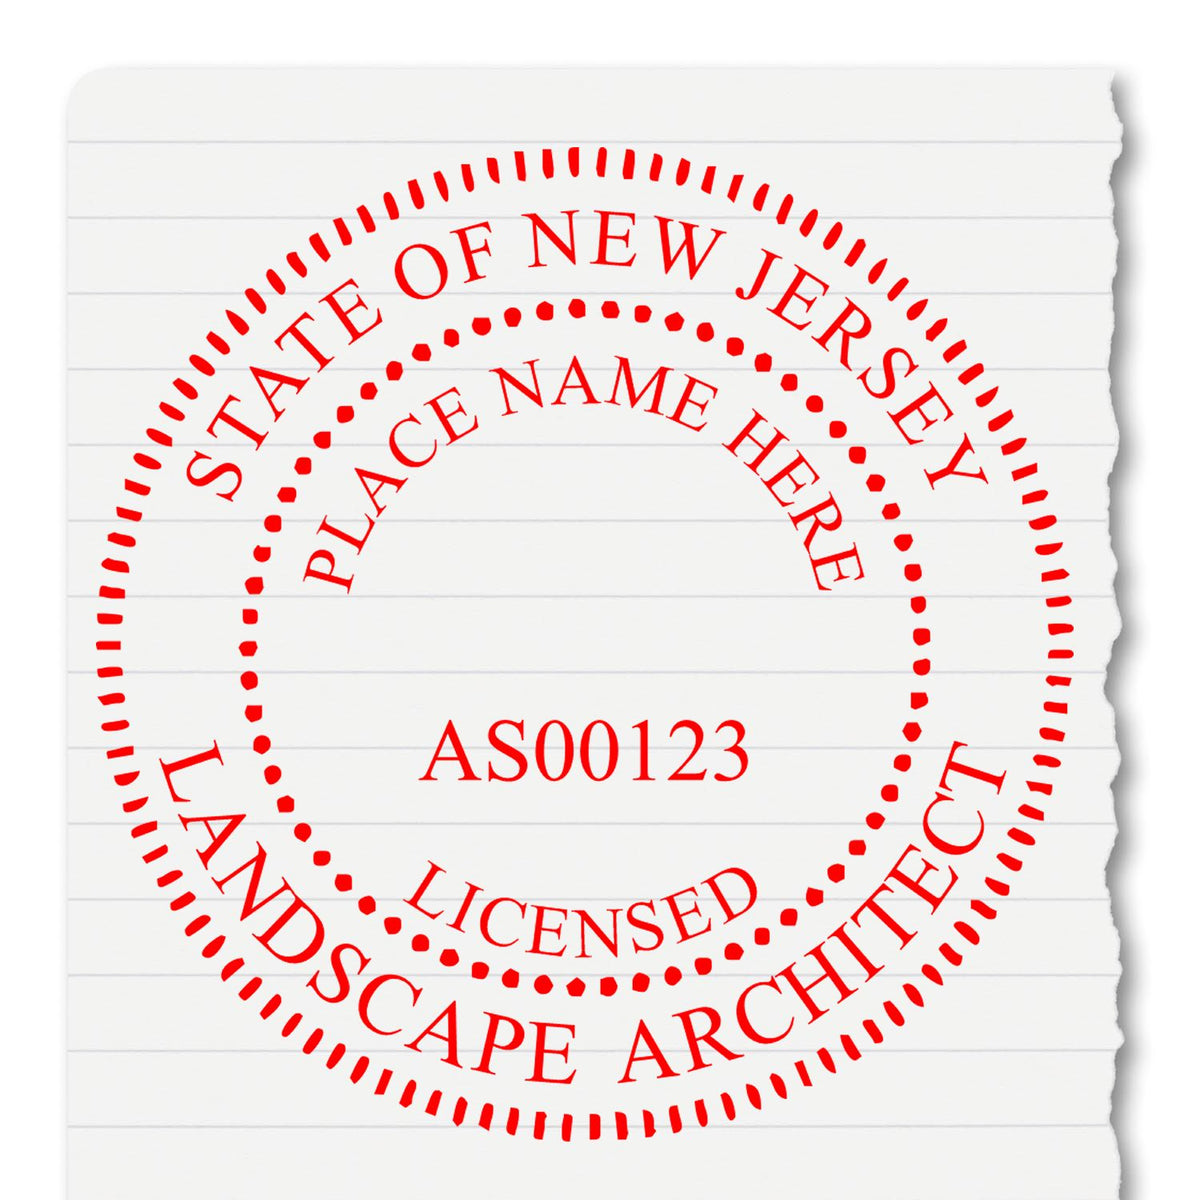 A stamped impression of the Self-Inking New Jersey Landscape Architect Stamp in this stylish lifestyle photo, setting the tone for a unique and personalized product.